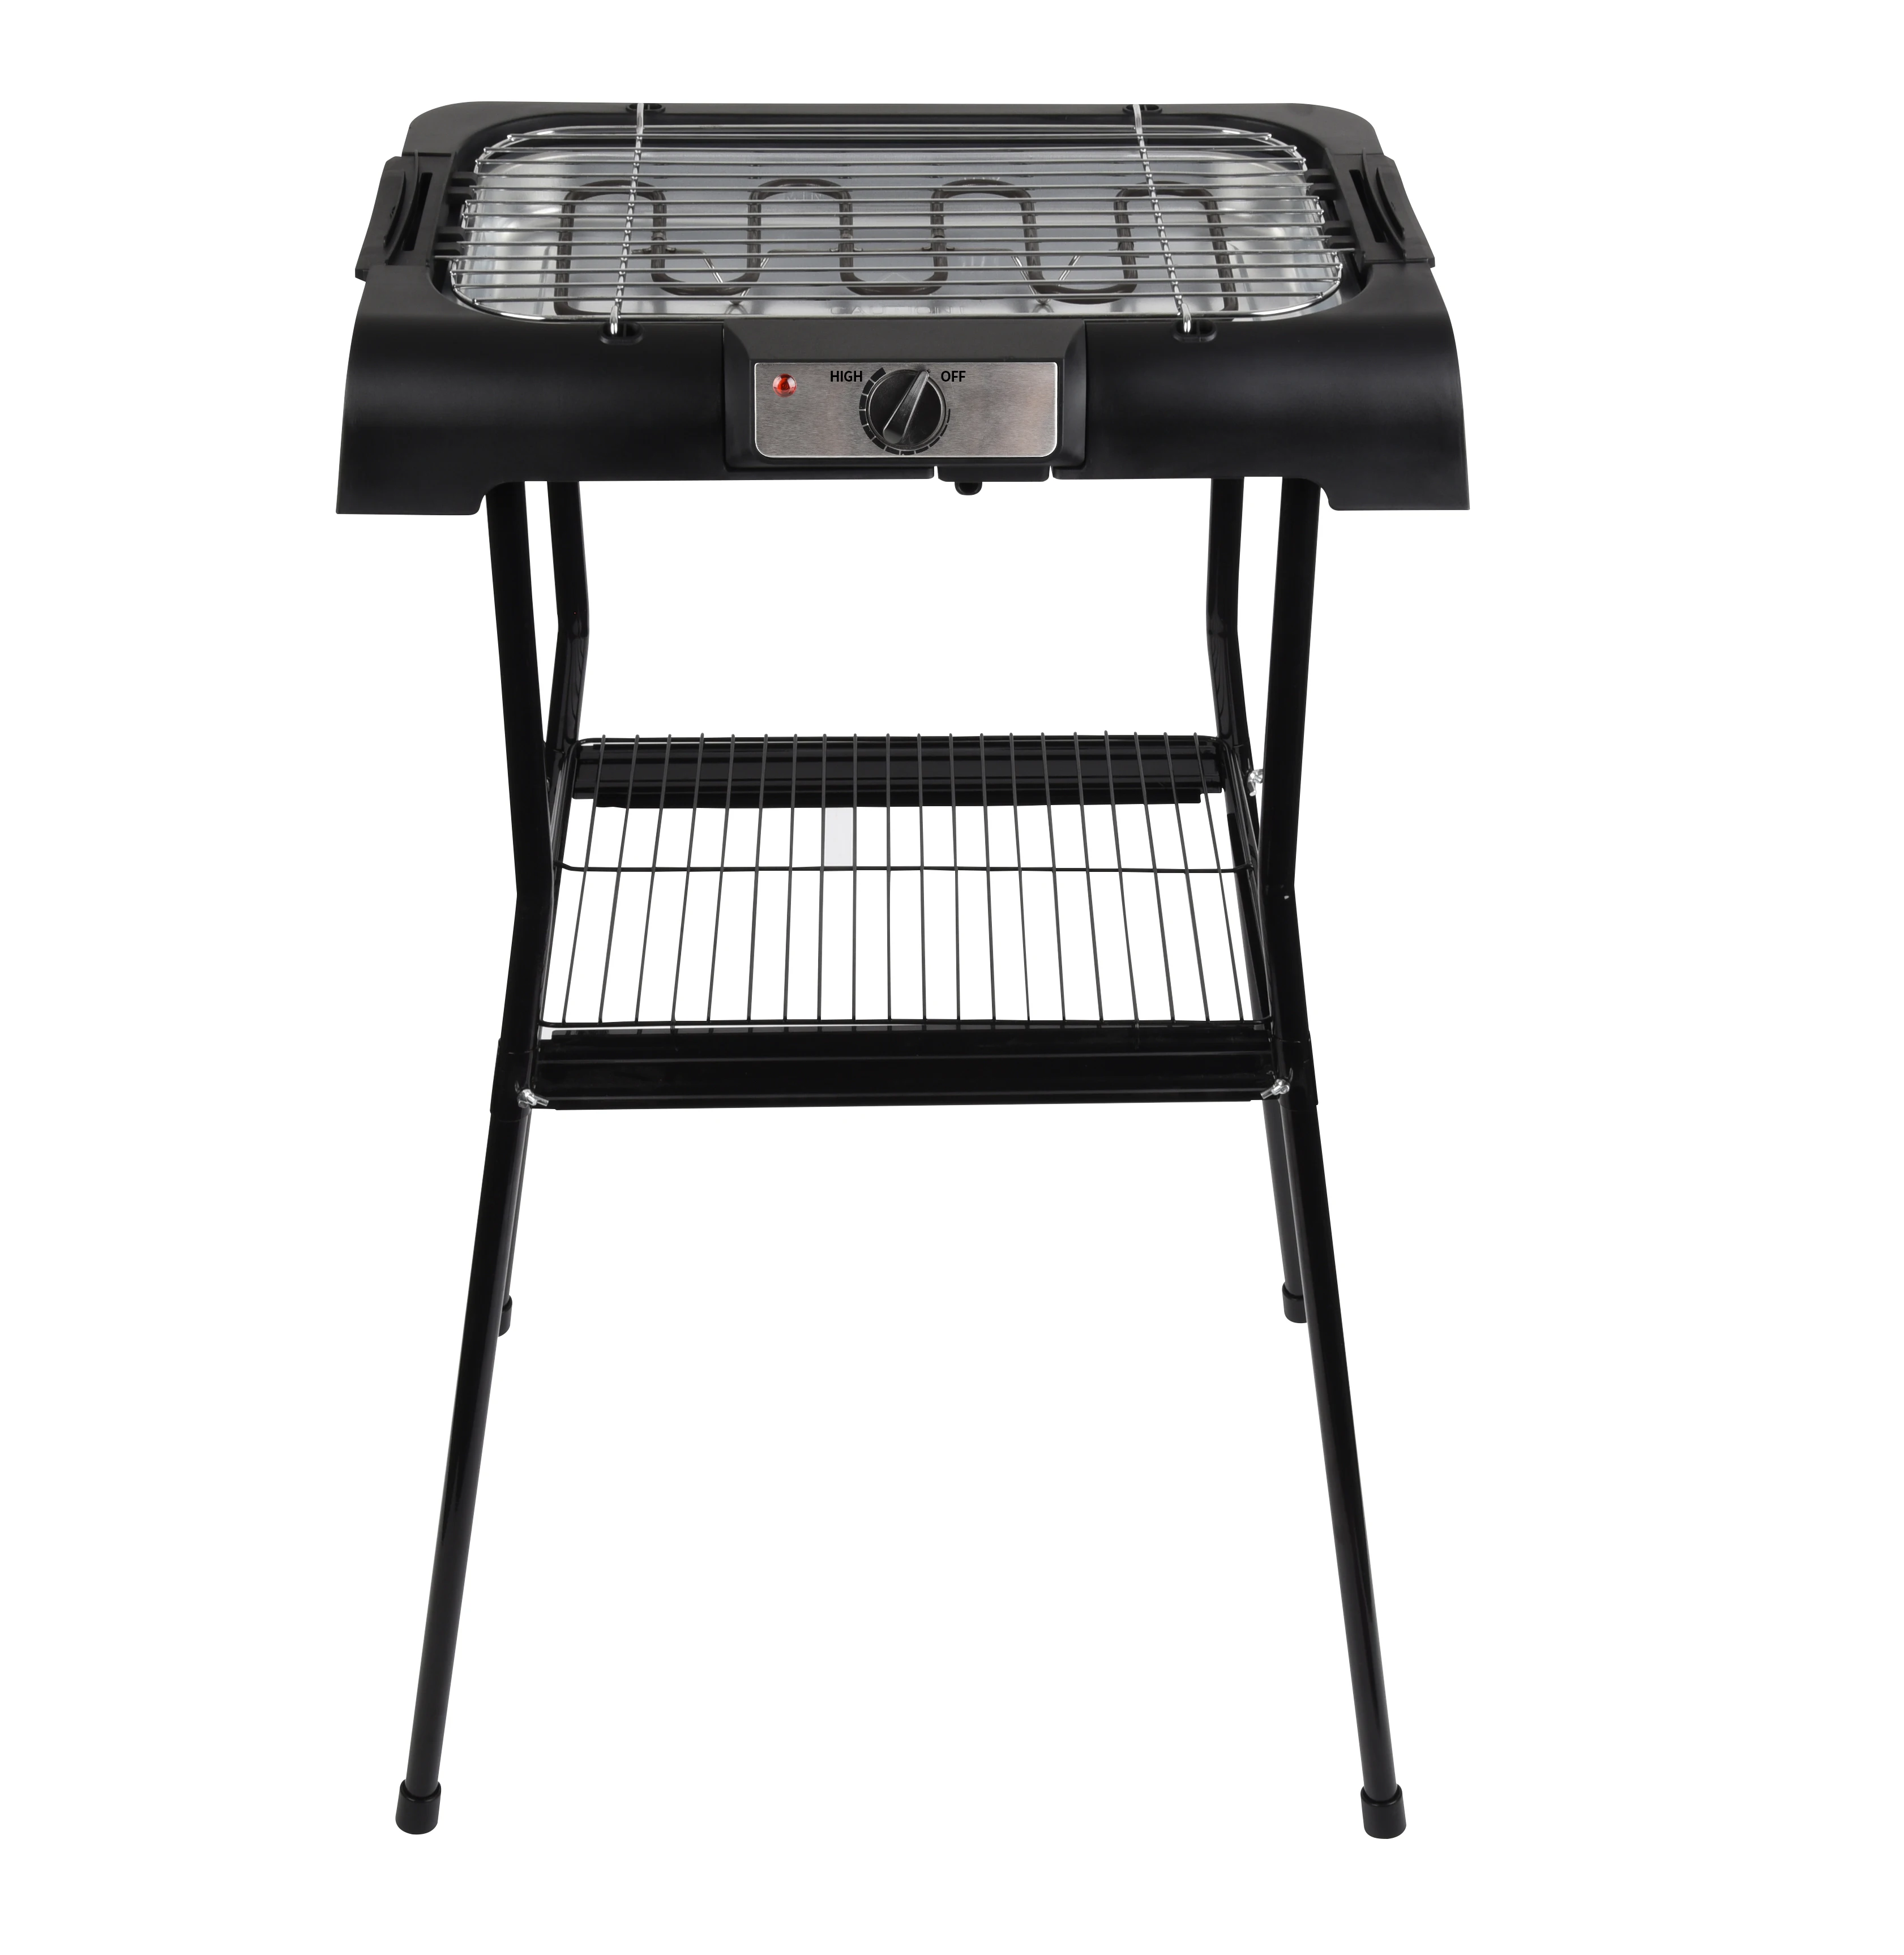 Adolescent Vader fage Ongemak Outdoor Latest Design Bbq Grilled Chicken Garden Backyard Stainless Steel  Free Standing Barbeque Grill Outdoor - Buy Barbeque Grill Outdoor,Barbeque  Grill,Garden Barbeque Grill Product on Alibaba.com